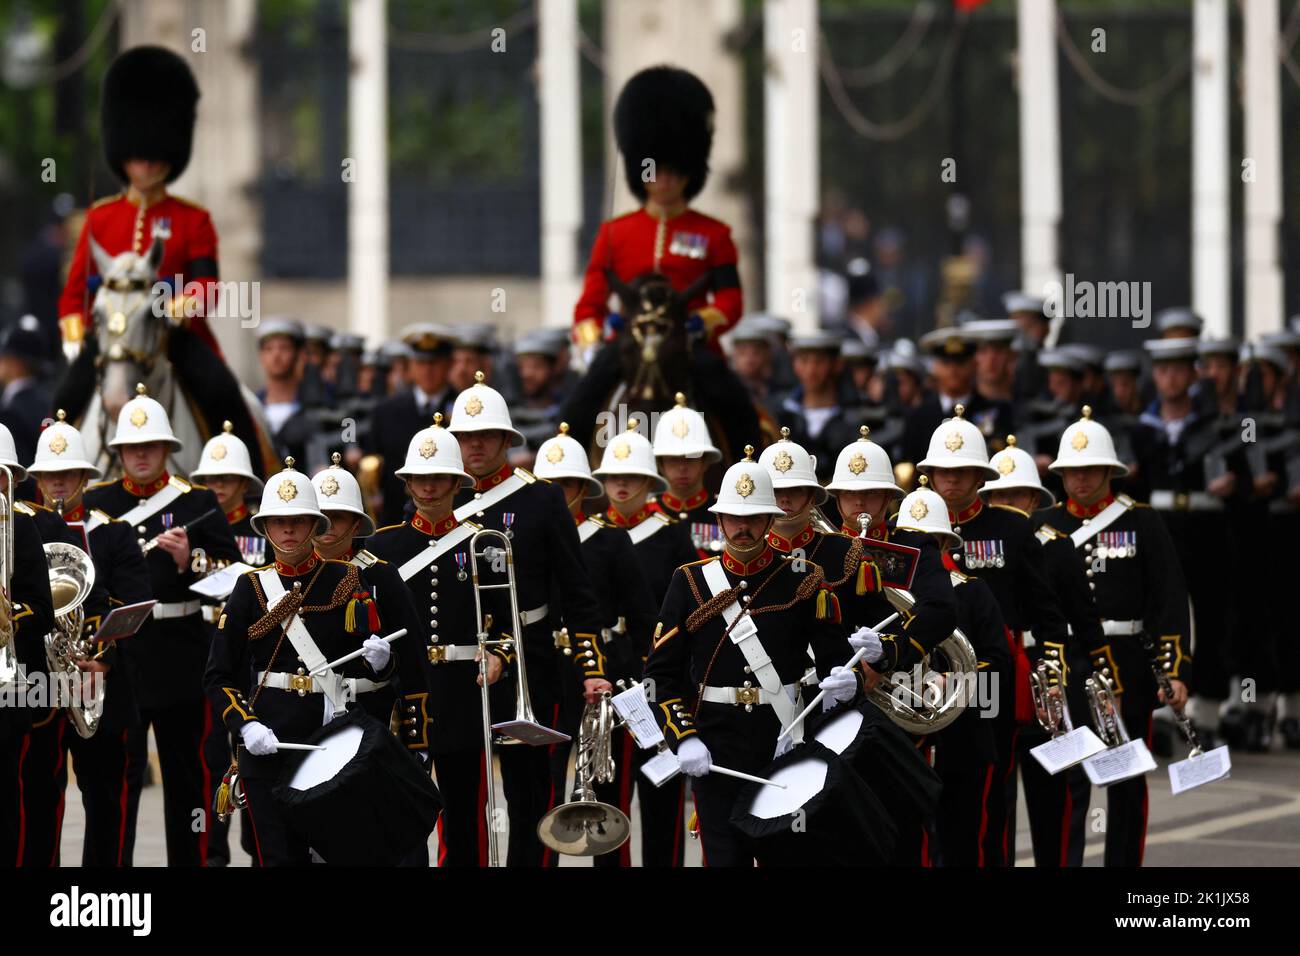 A view of a marching band, on the day of the state funeral and burial of Britain's Queen Elizabeth, outside Westminster Abbey in London, Britain, September 19, 2022.   REUTERS/Kai Pfaffenbach Stock Photo